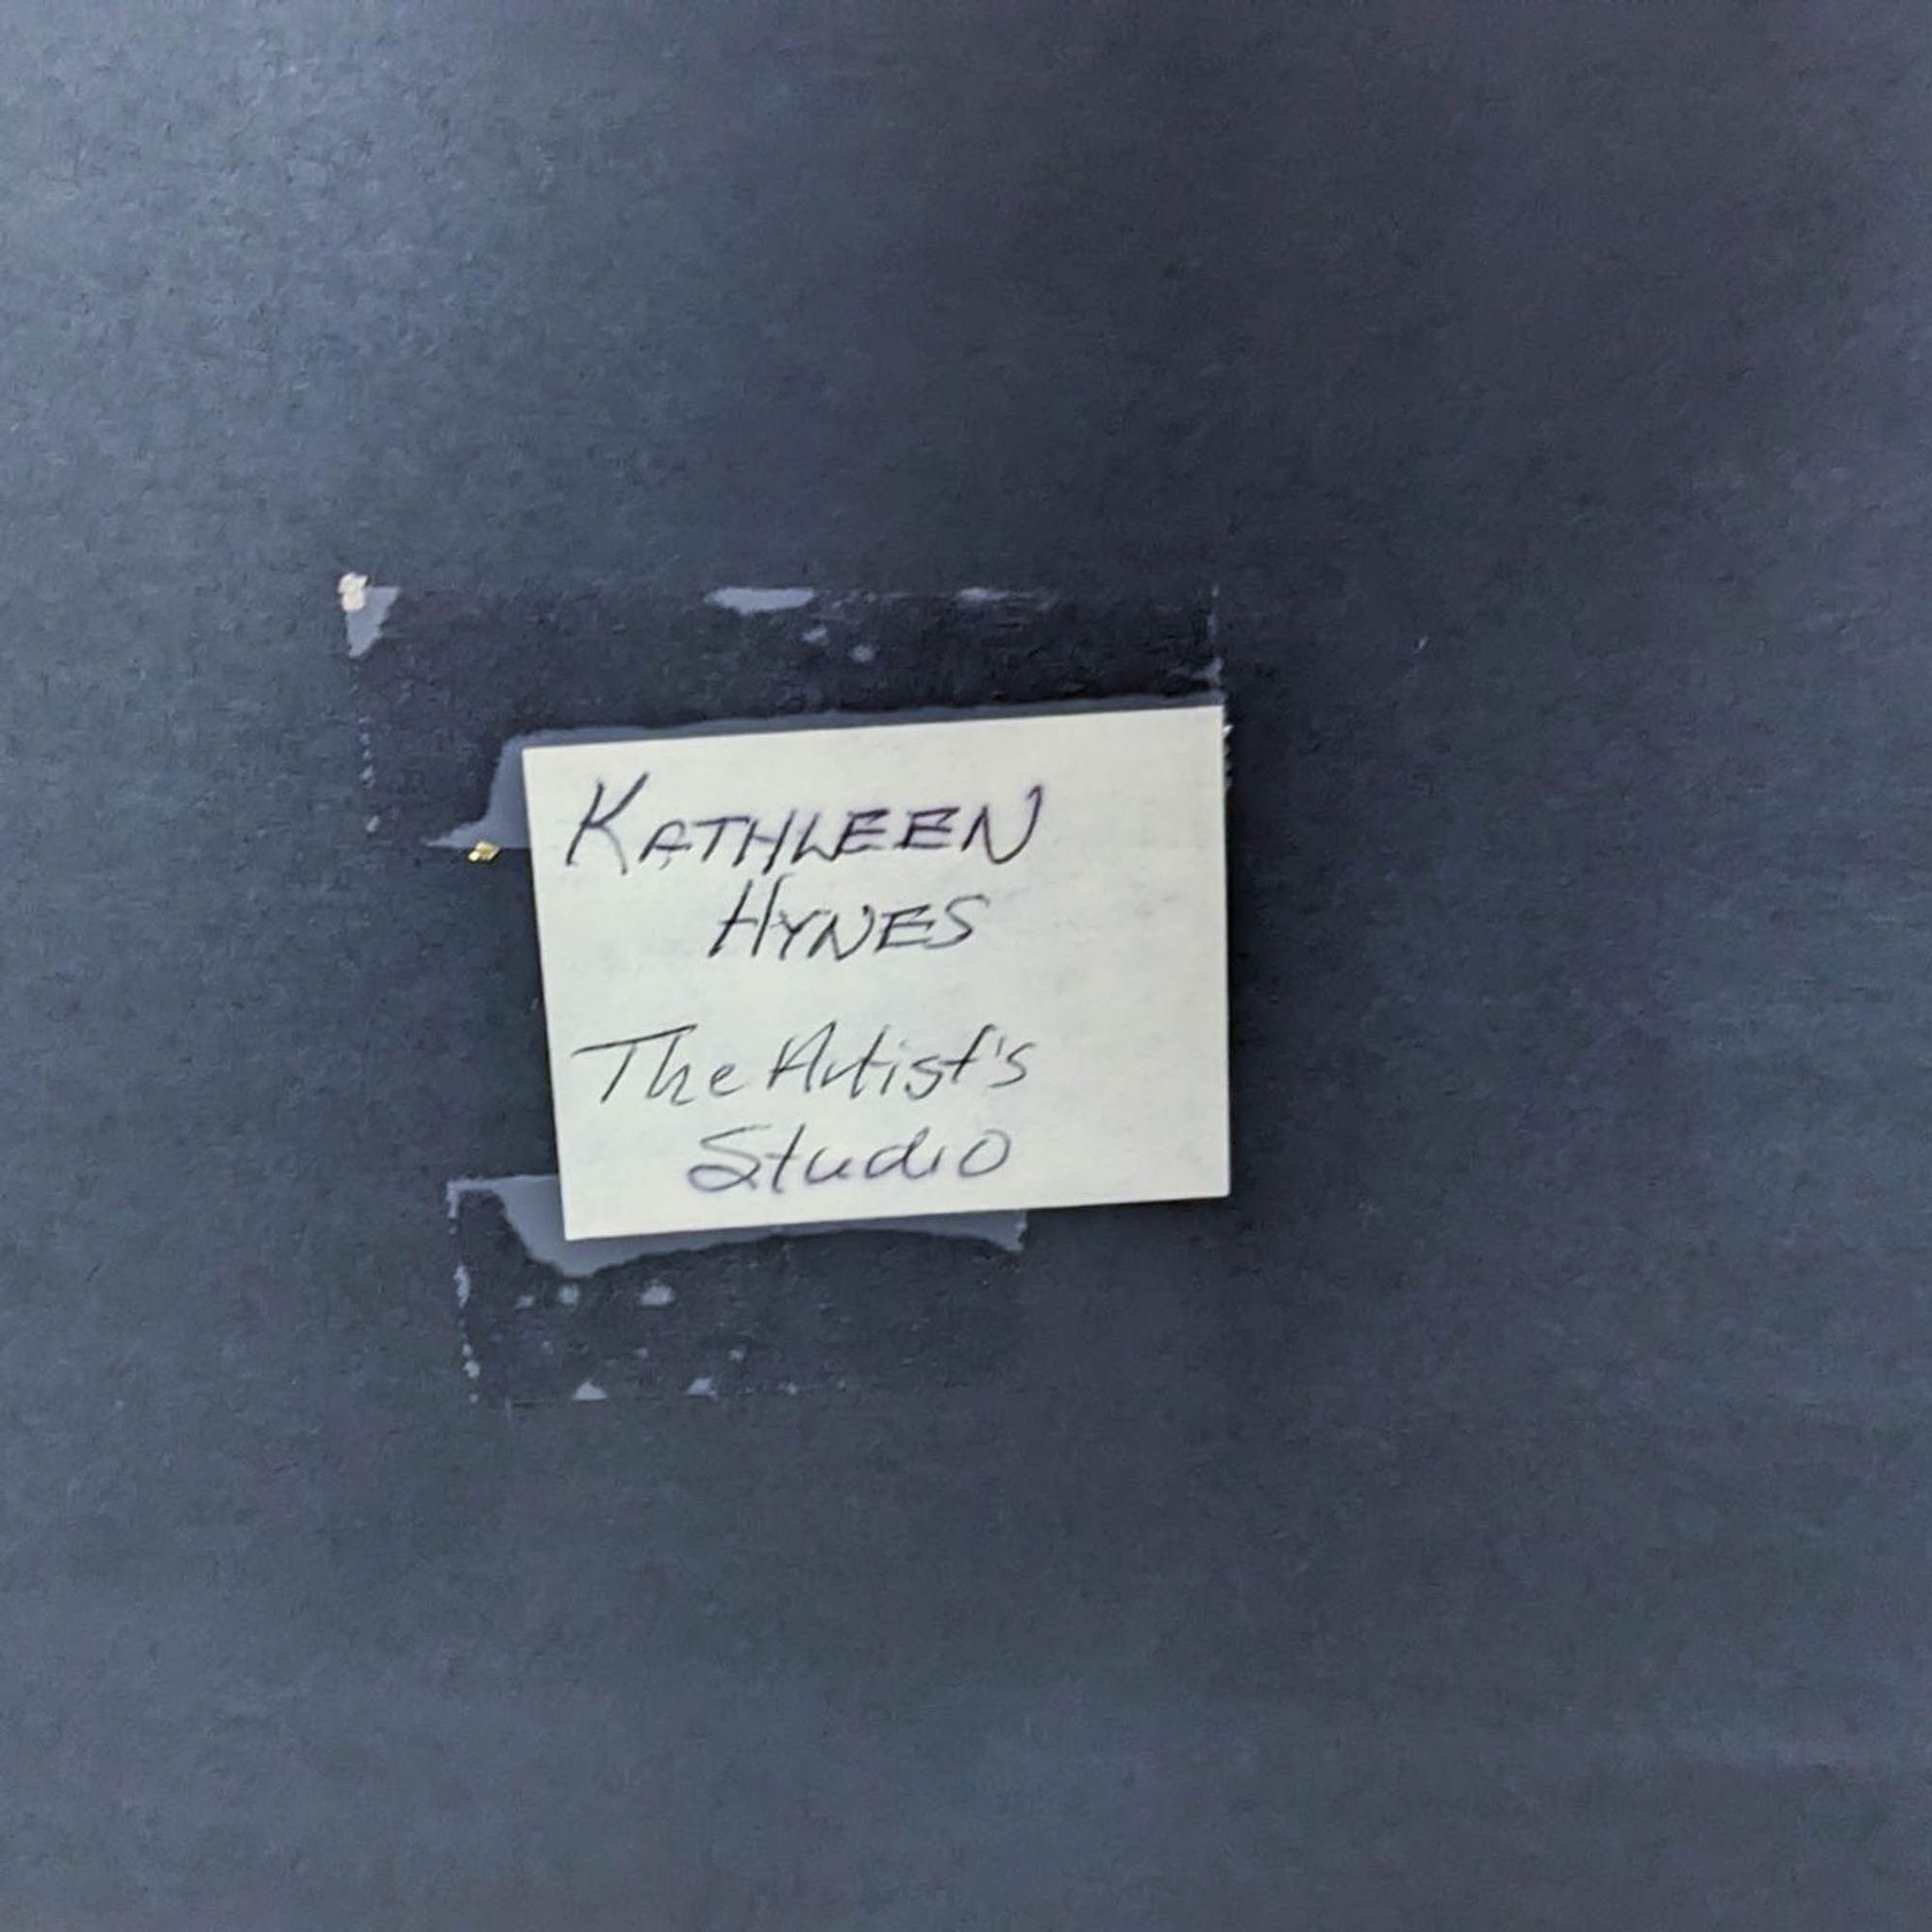 Piece of paper with "Kathleen Hynes The Artist's Studio" handwritten on it, taped on a dark surface.